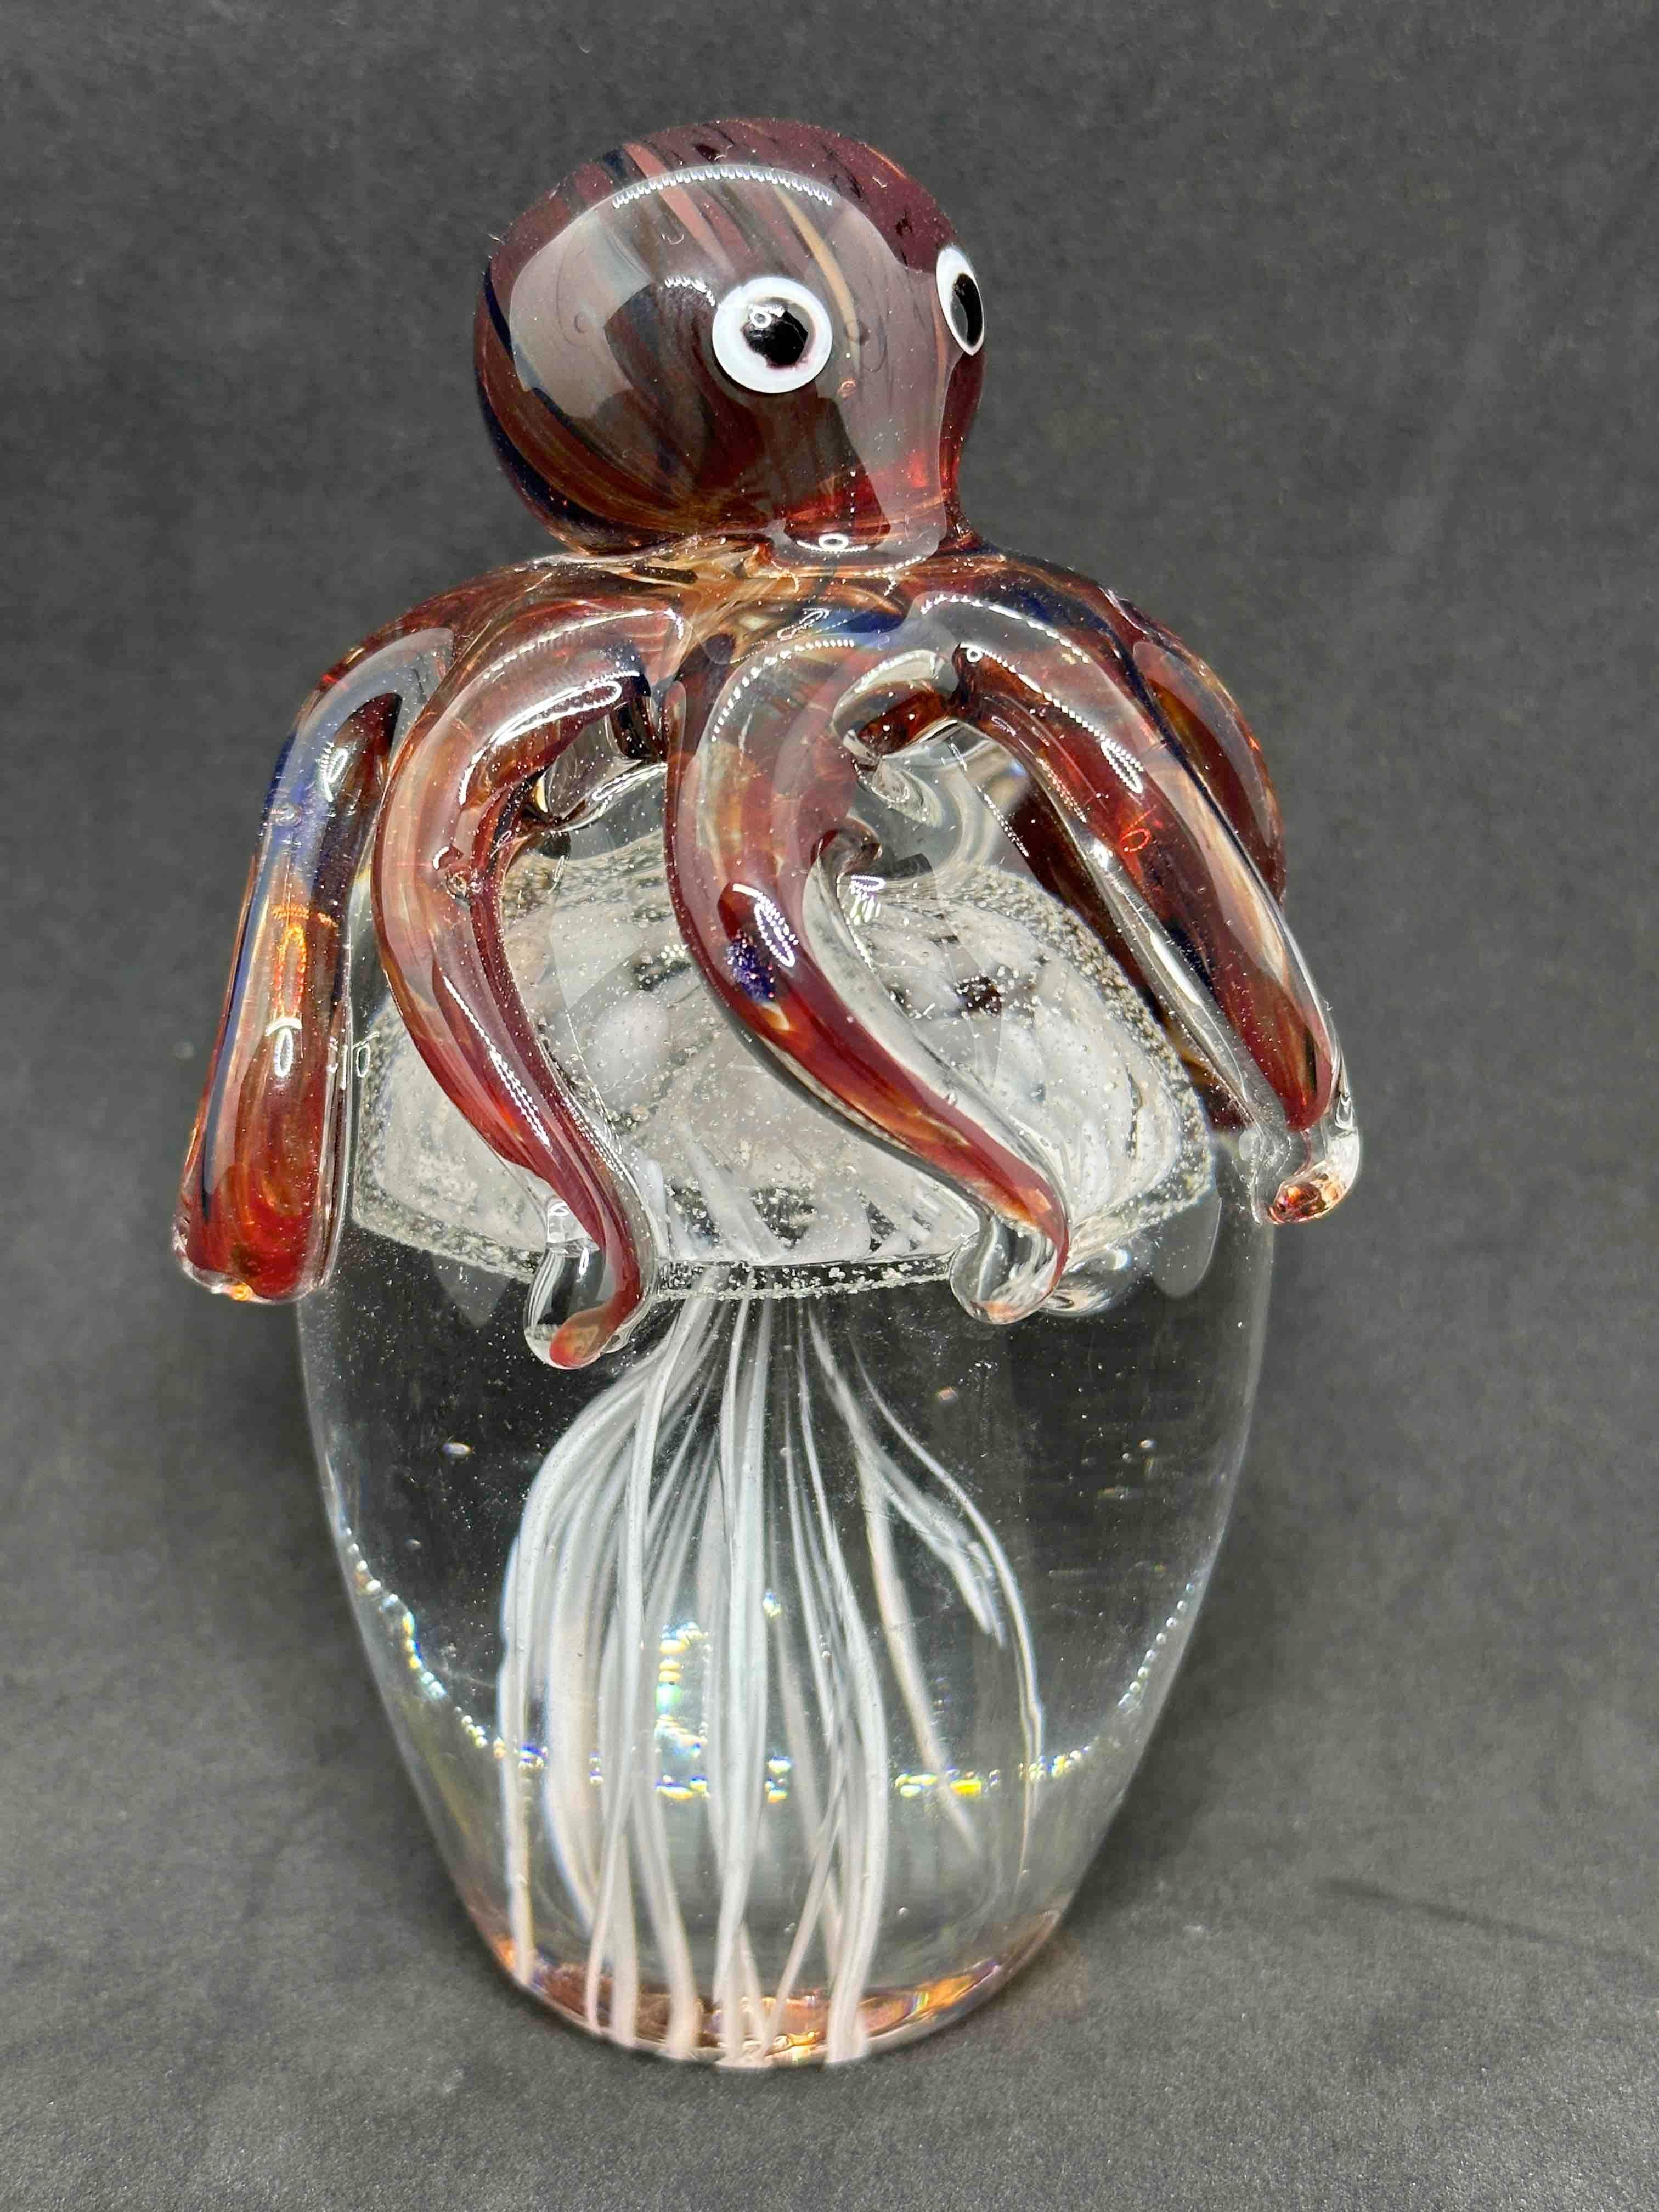 Beautiful Murano hand blown aquarium Italian art glass paper weight. Showing a octopus holding a jelly fish, underwater floating on controlled bubbles inside. Colors are a brown, white, blue, black and clear. A beautiful nice addition to your